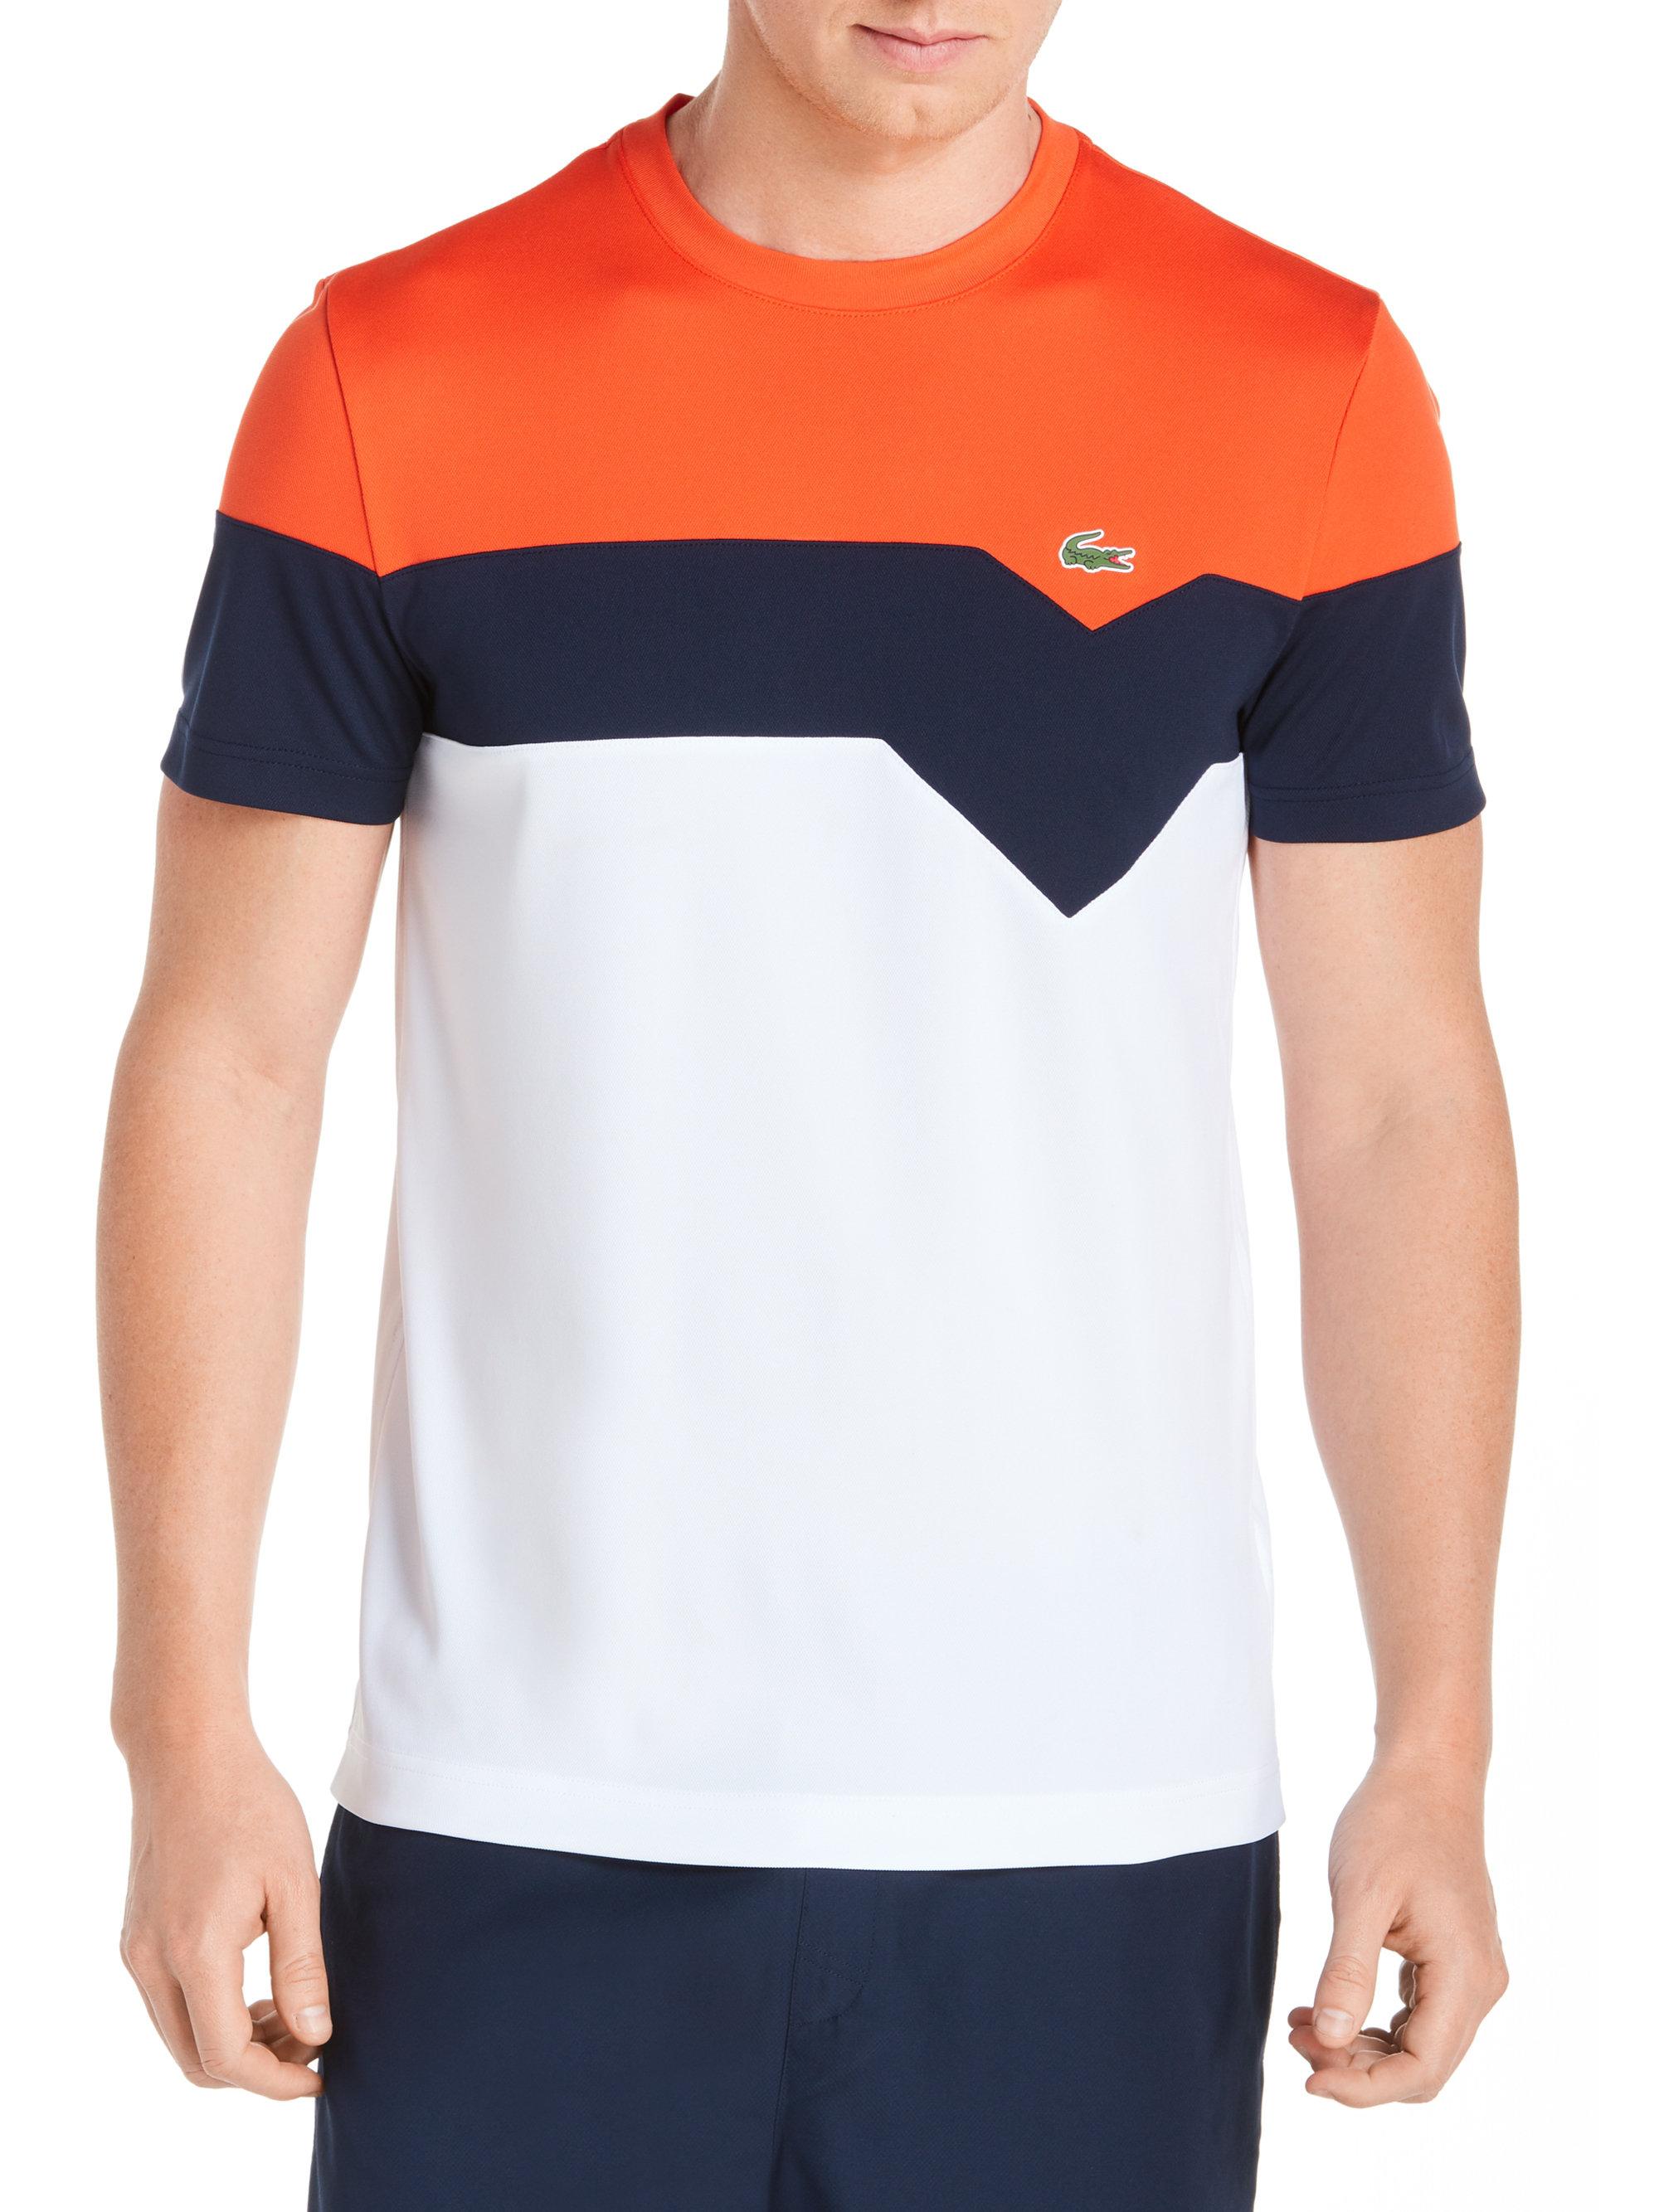 Lyst - Lacoste Colorblock Polo in Blue for Men